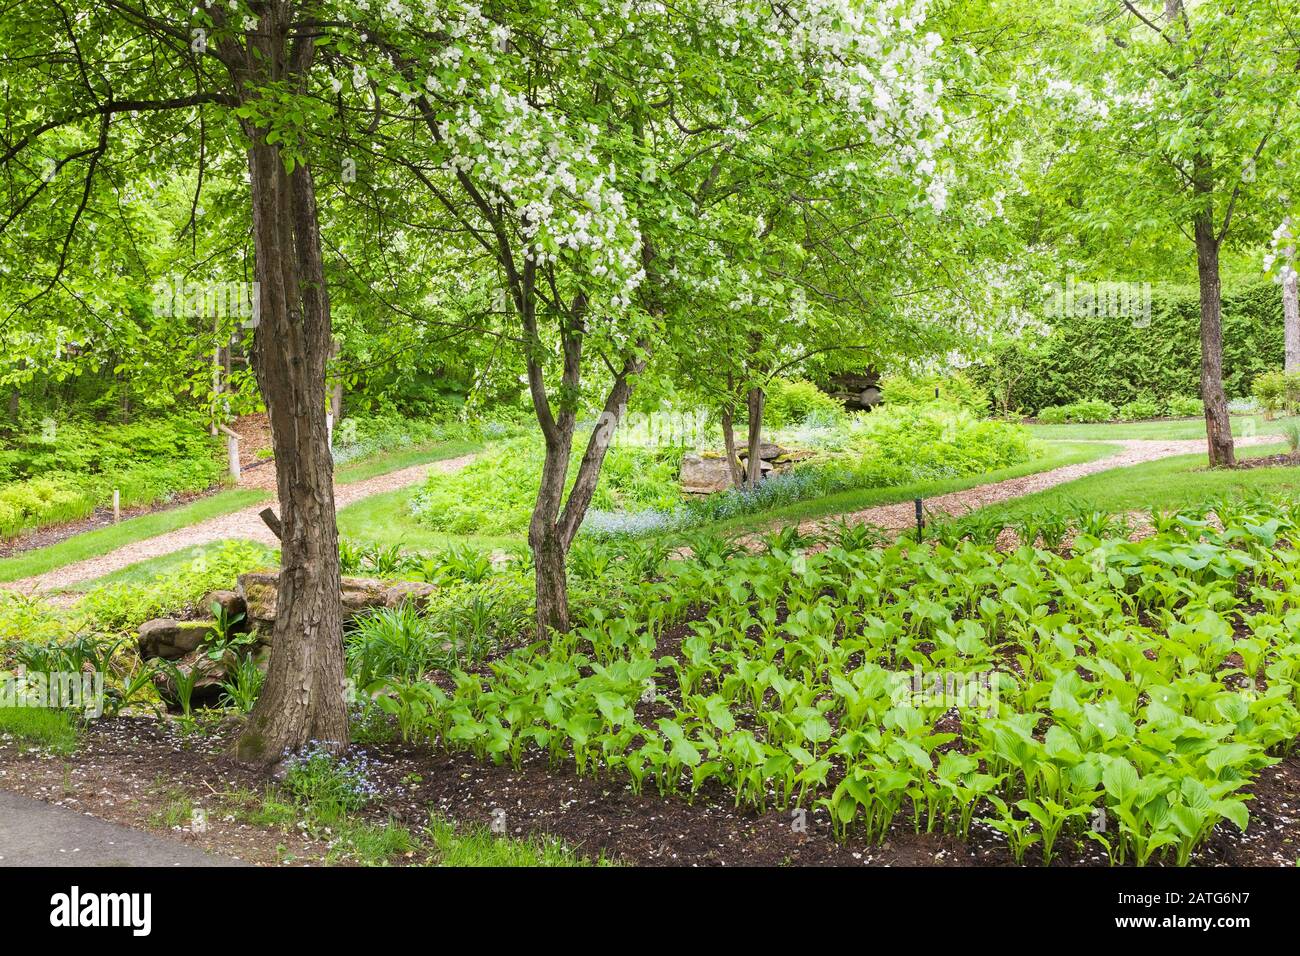 Malus domestica - Common Apple tree underplanted with Hosta 'Royal Standard' and mulch paths in backyard garden in spring, Le Jardin de Francois Stock Photo